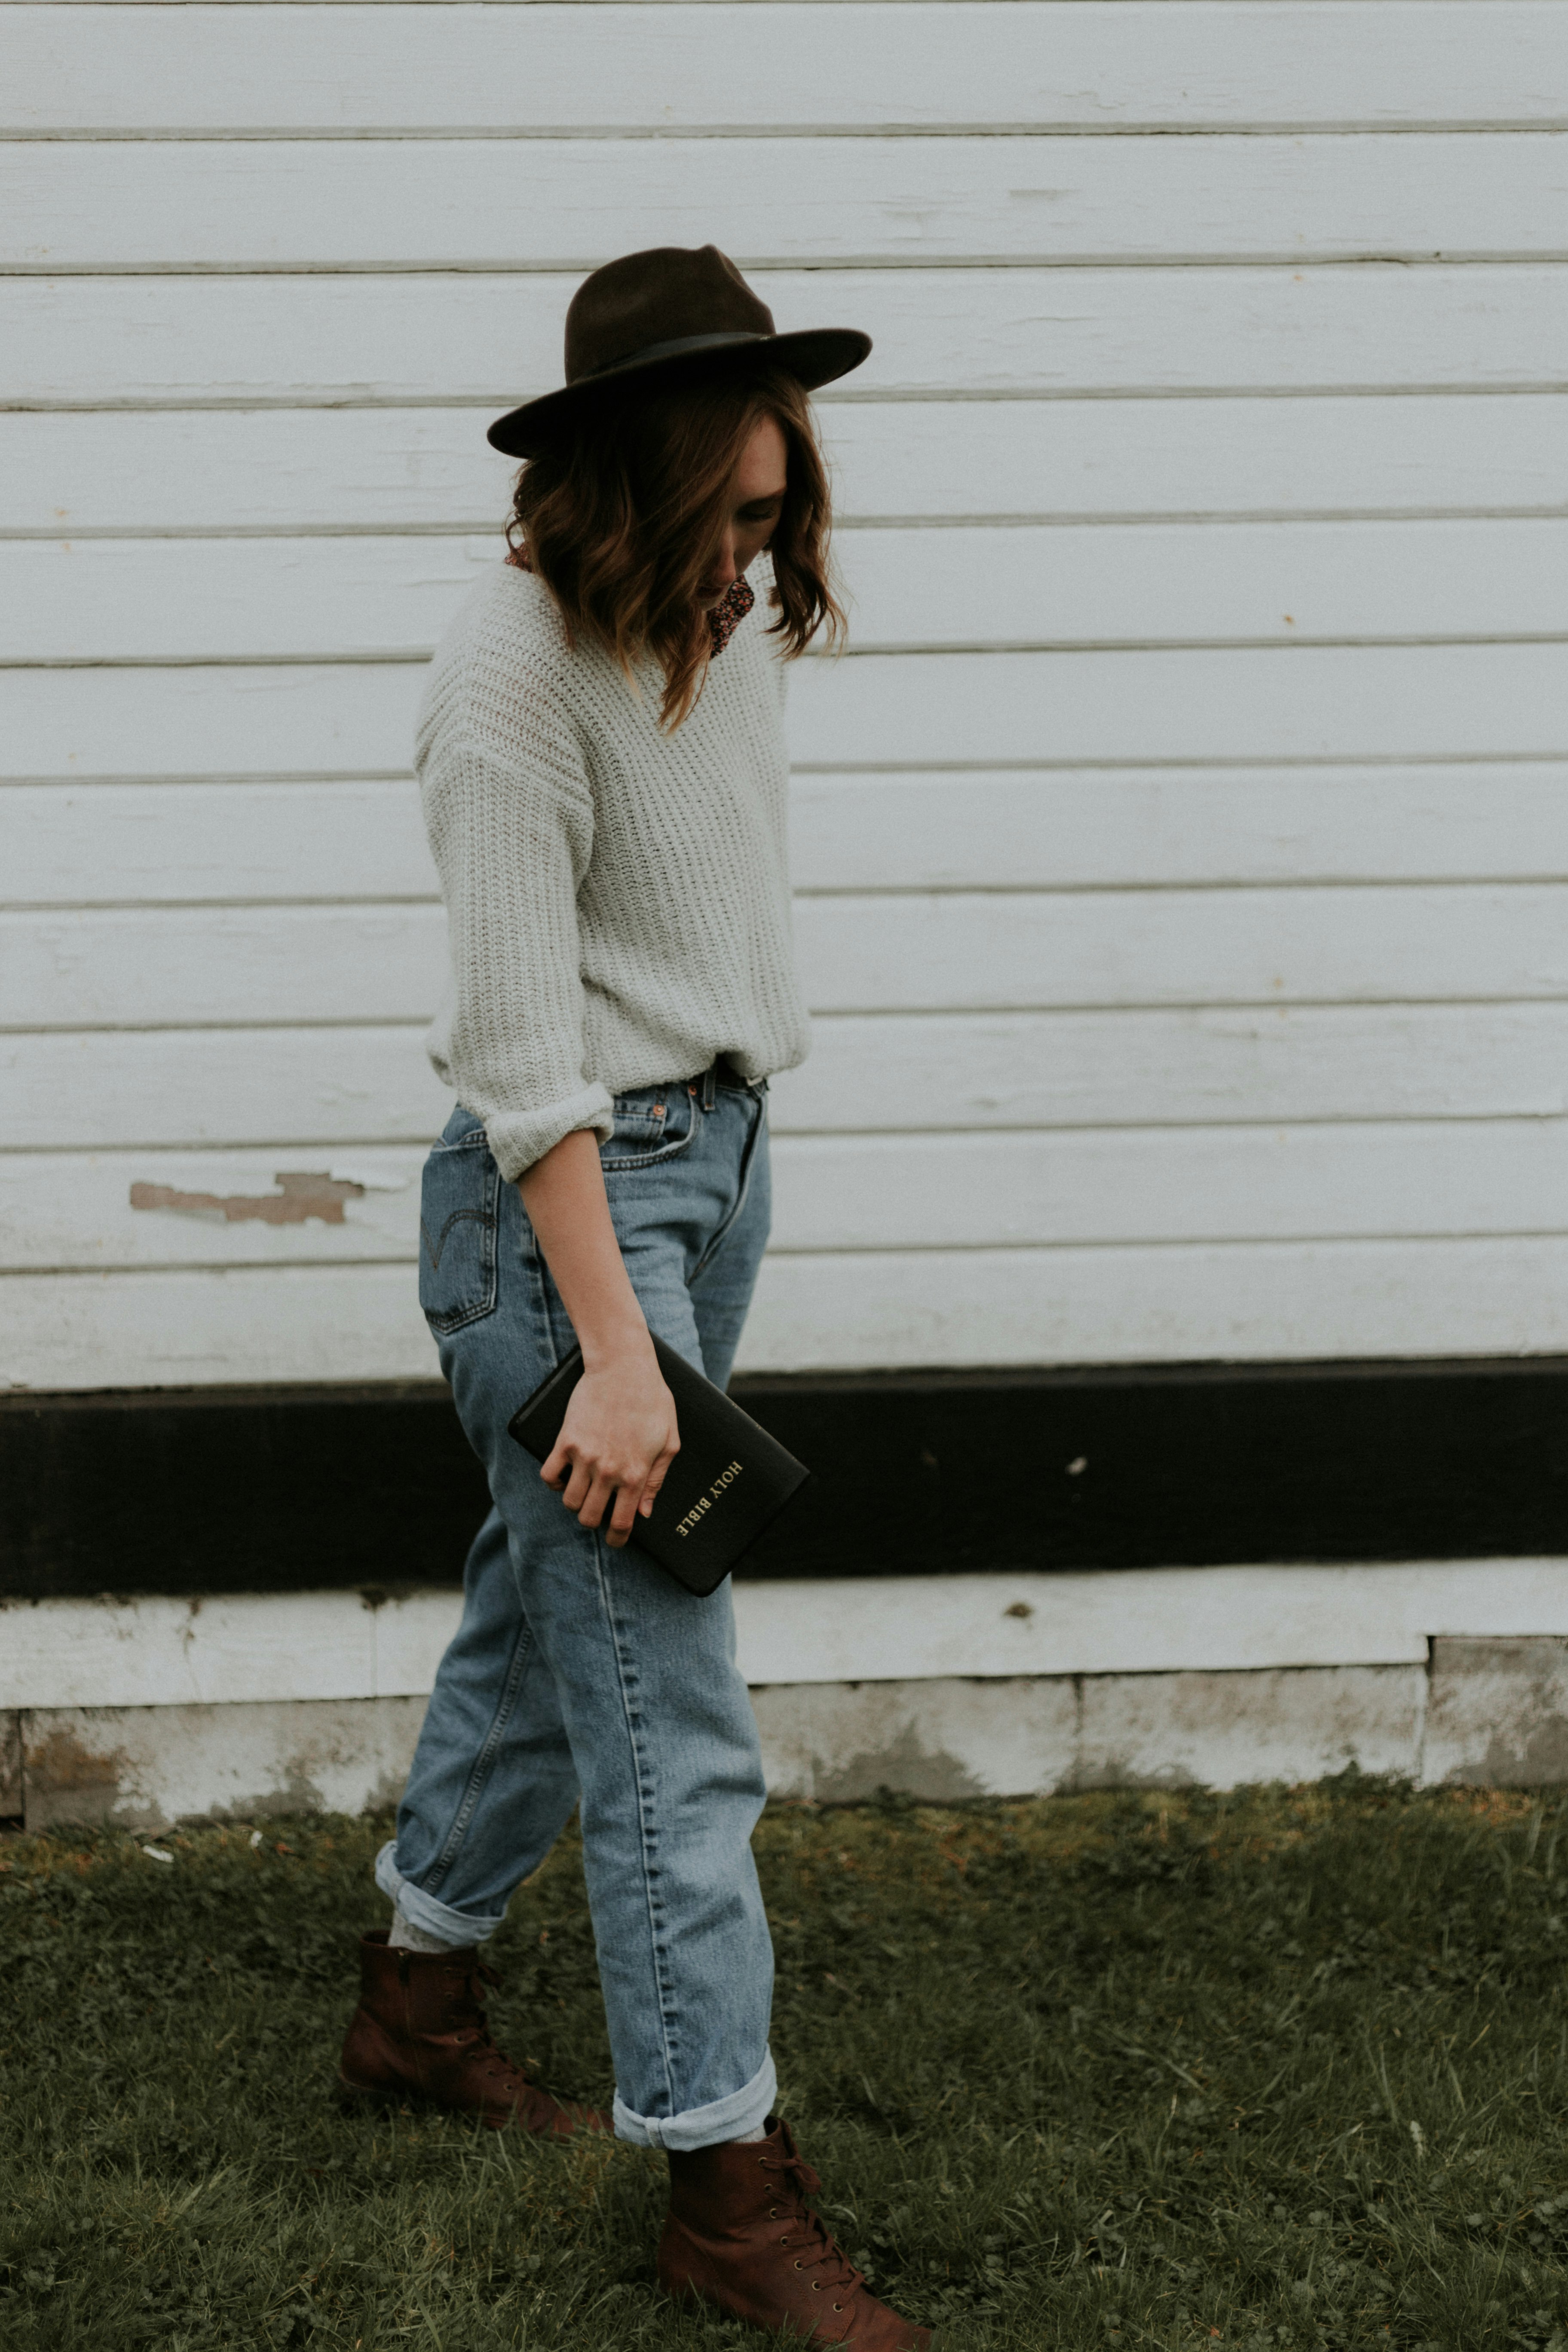 gray long-sleeved shirt and blue denim jeans